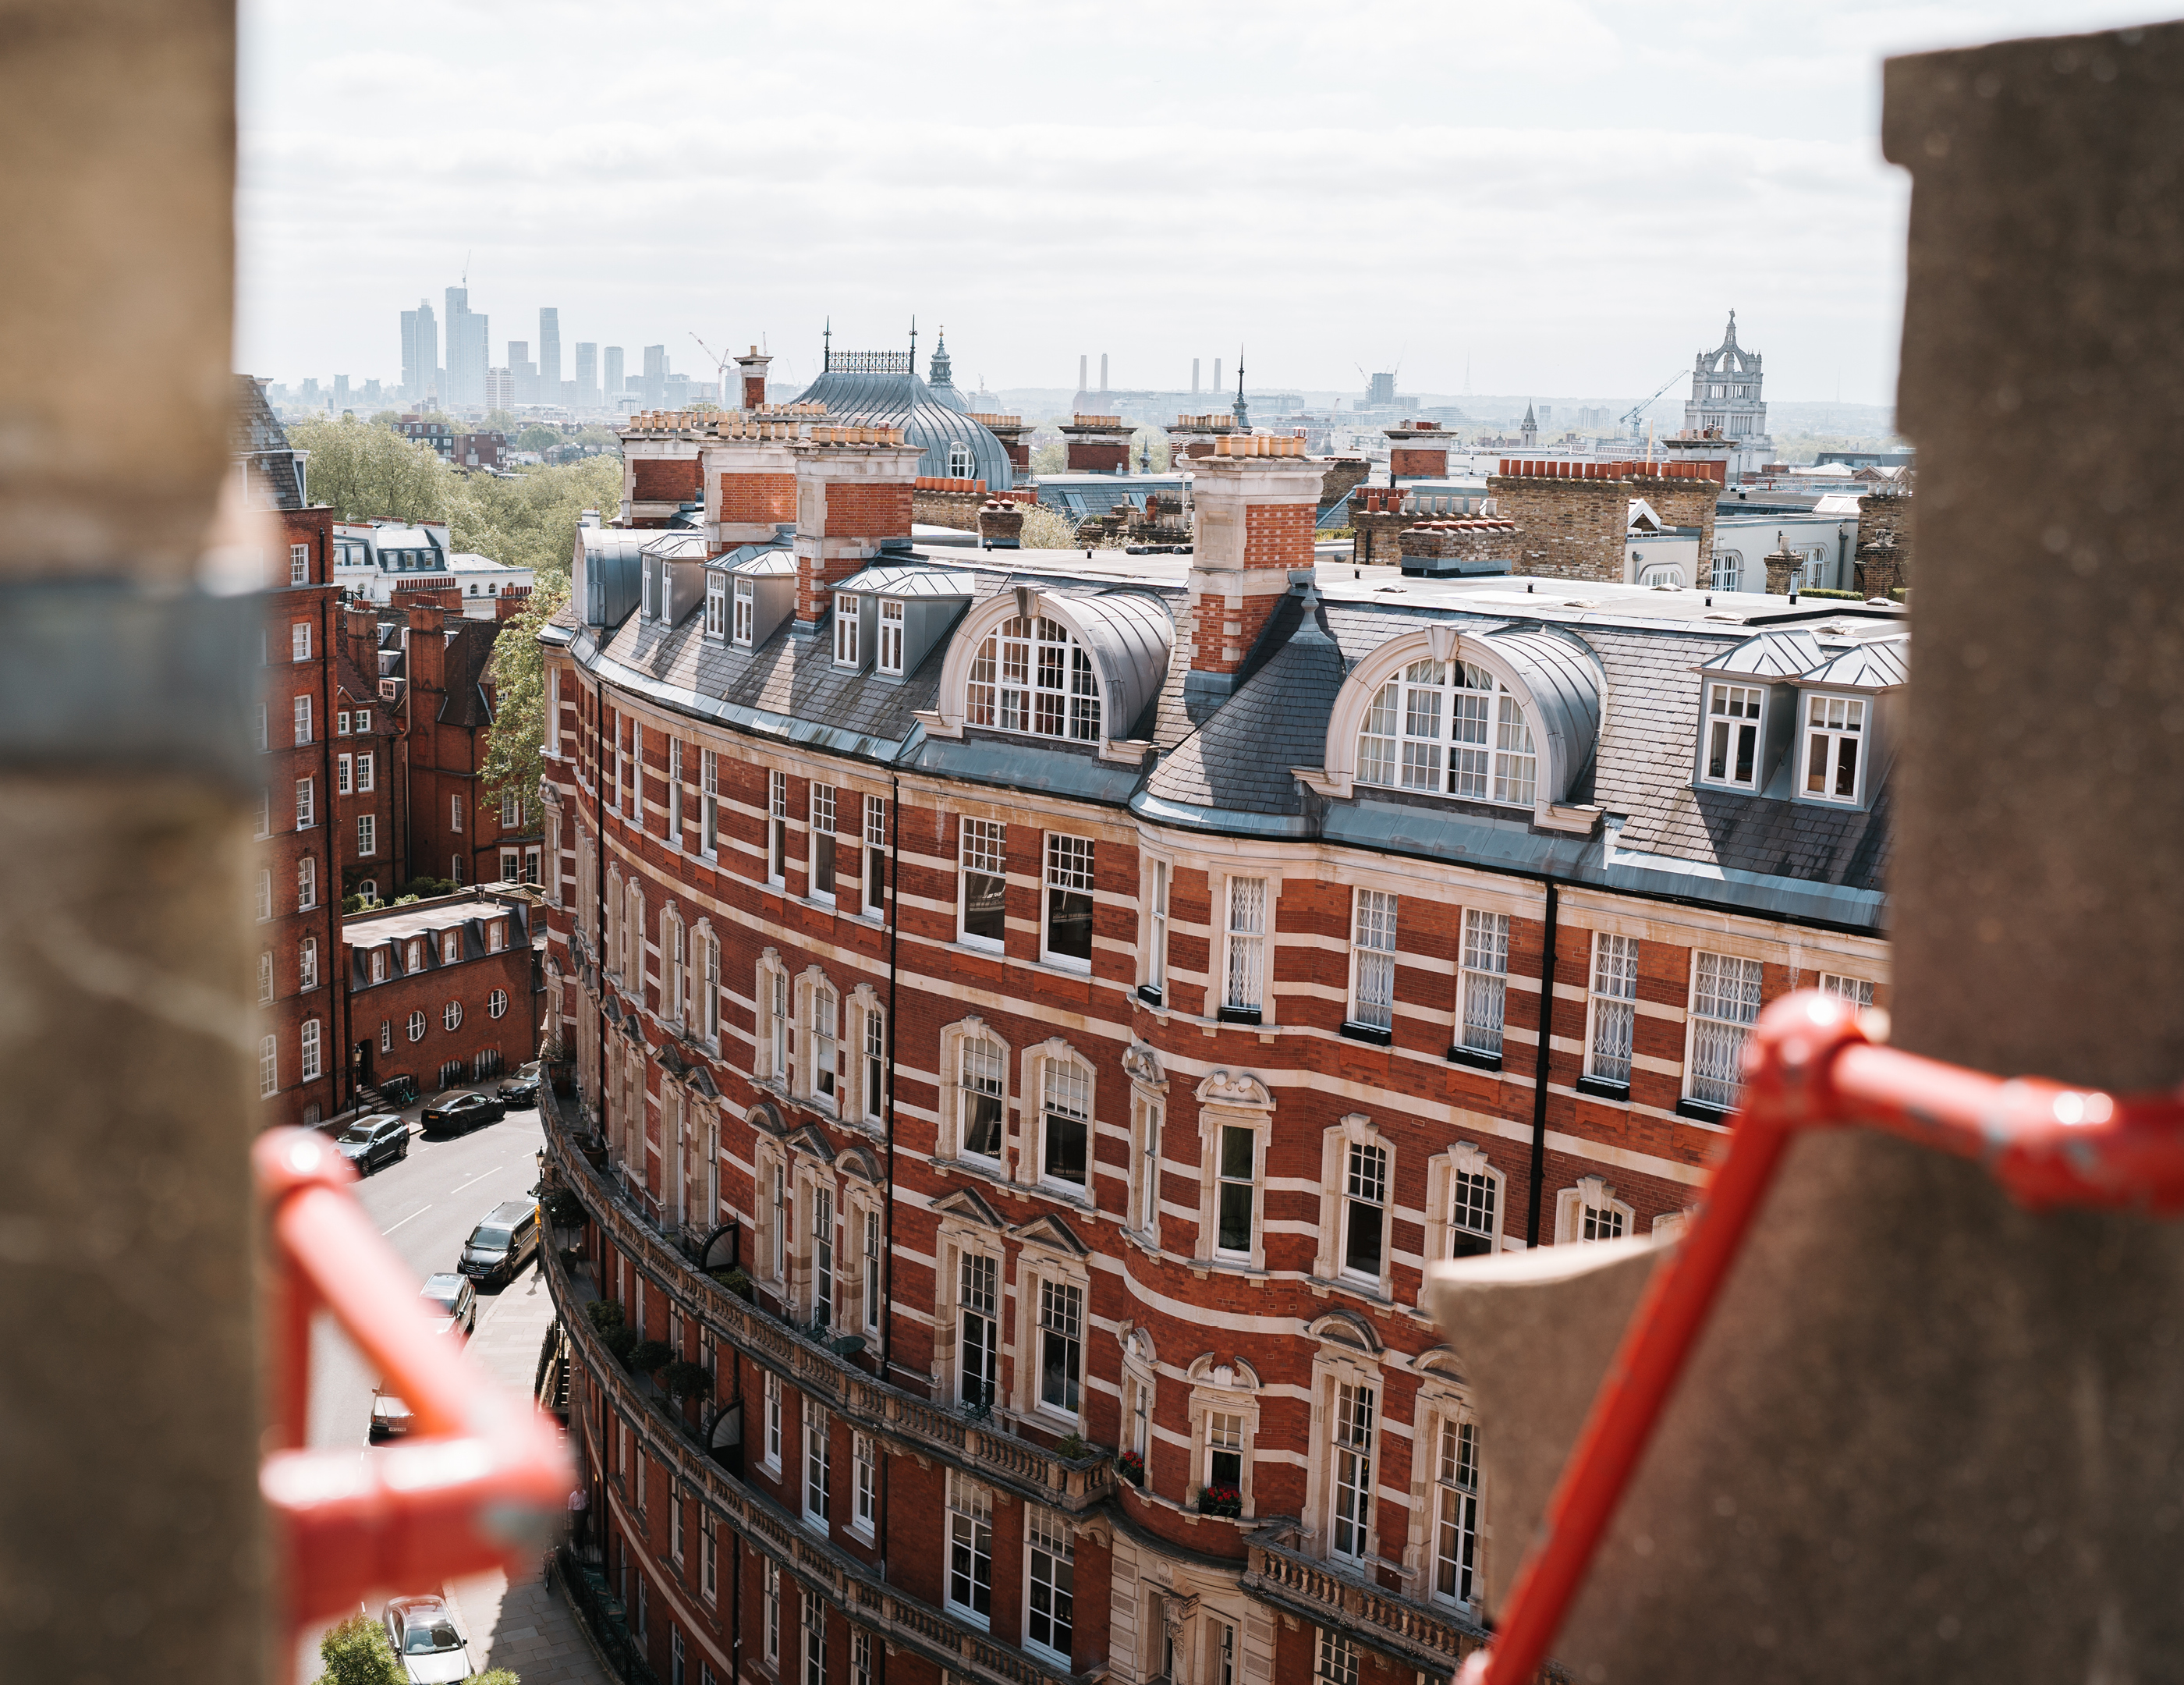 View from rooftop over red brick old building and London skyline in distance